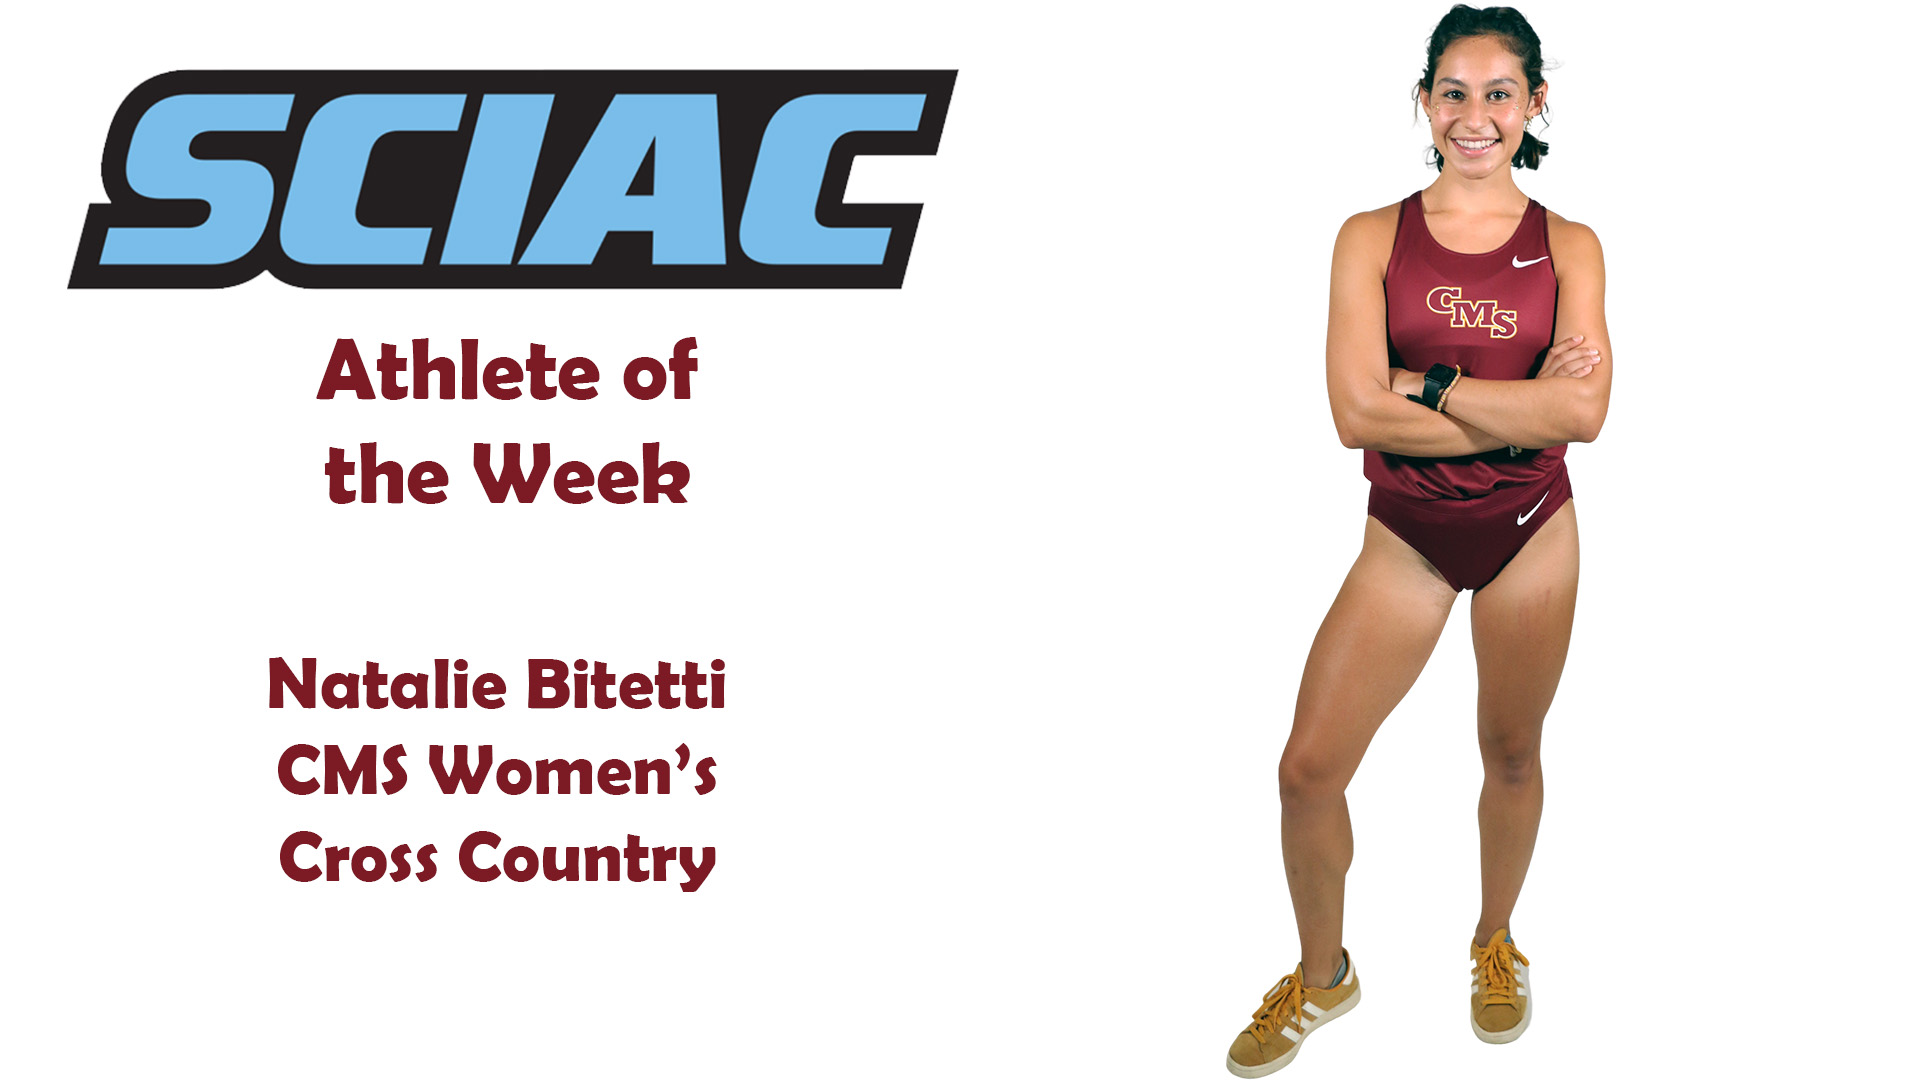 posed shot of Natalie Bitetti with the SCIAC logo